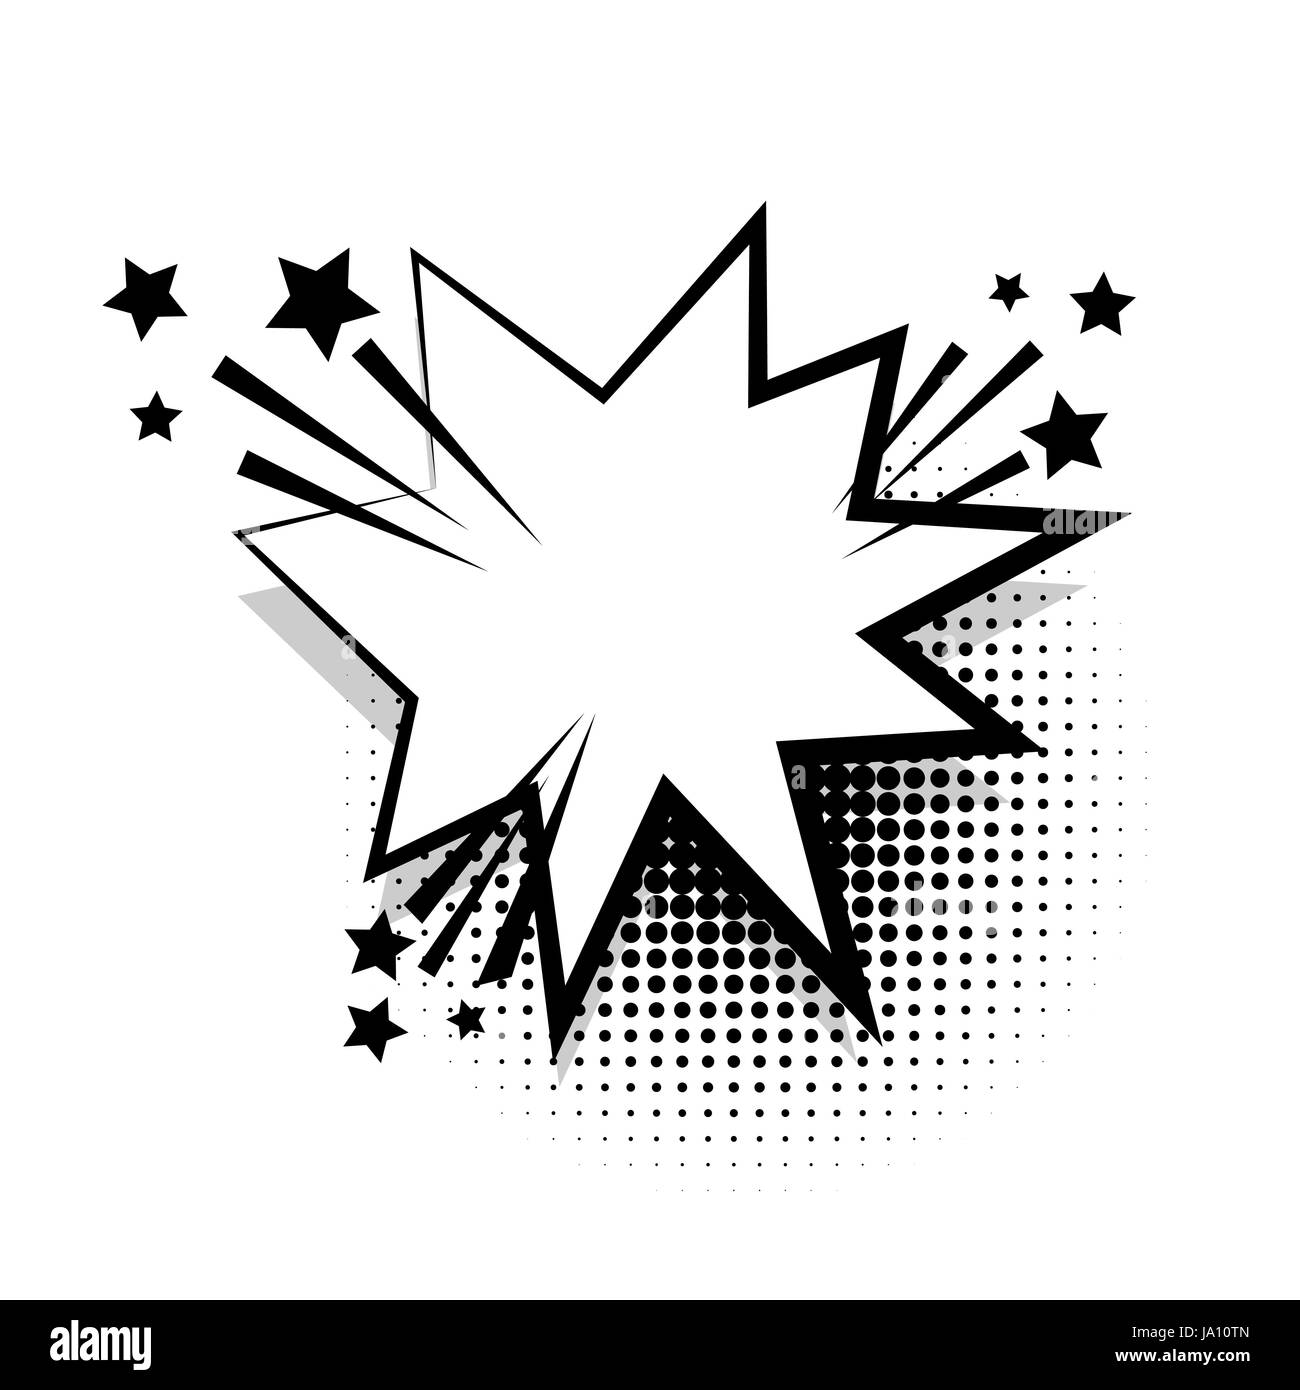 Star empty white comic book text balloon pop art. Bubble icon speech phrase. Cartoon funny label tag expression. Sound boom explosion effects. Adverti Stock Vector